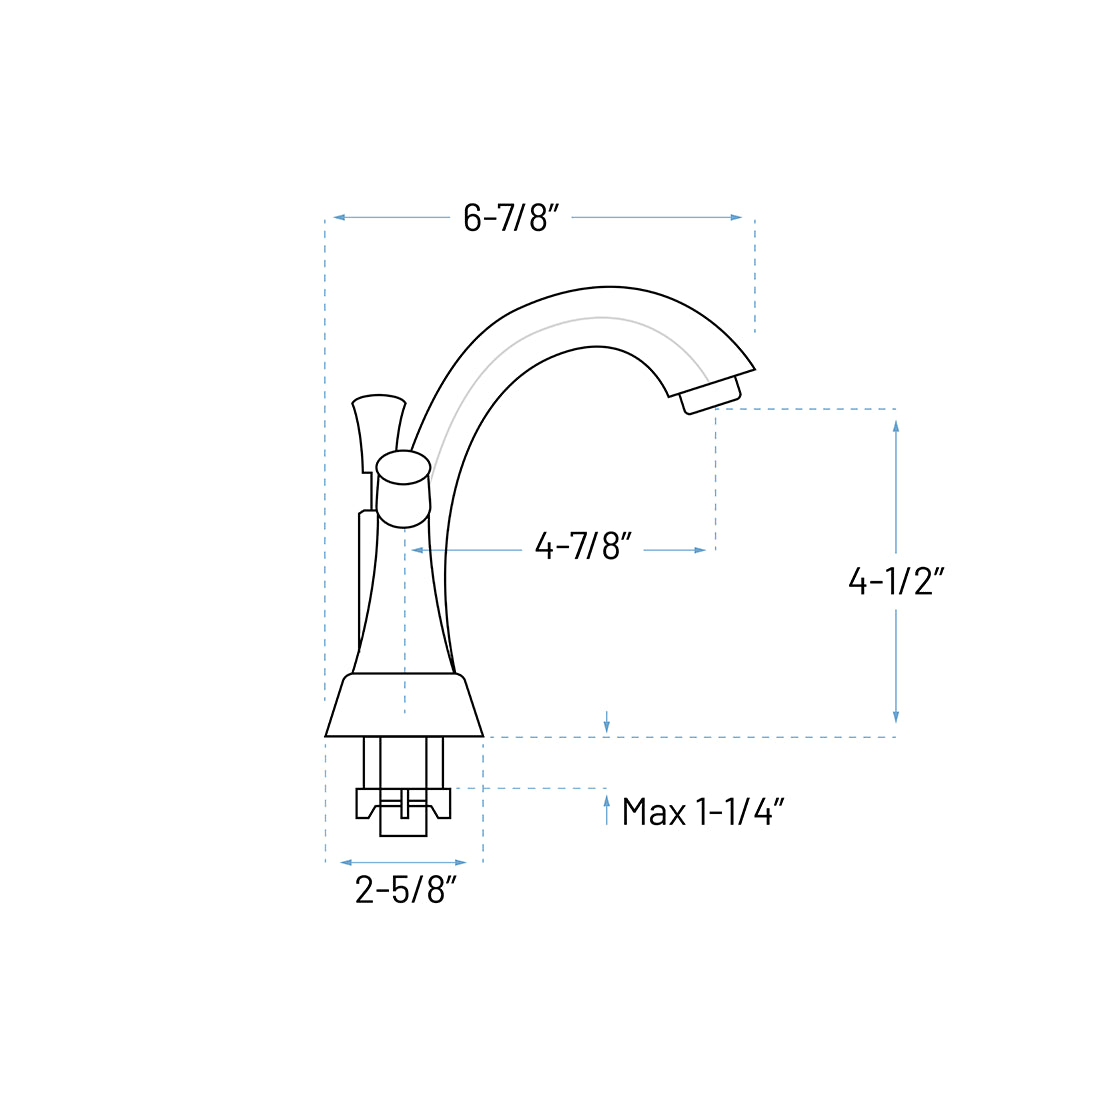 Technical Drawing of a bathroom faucet